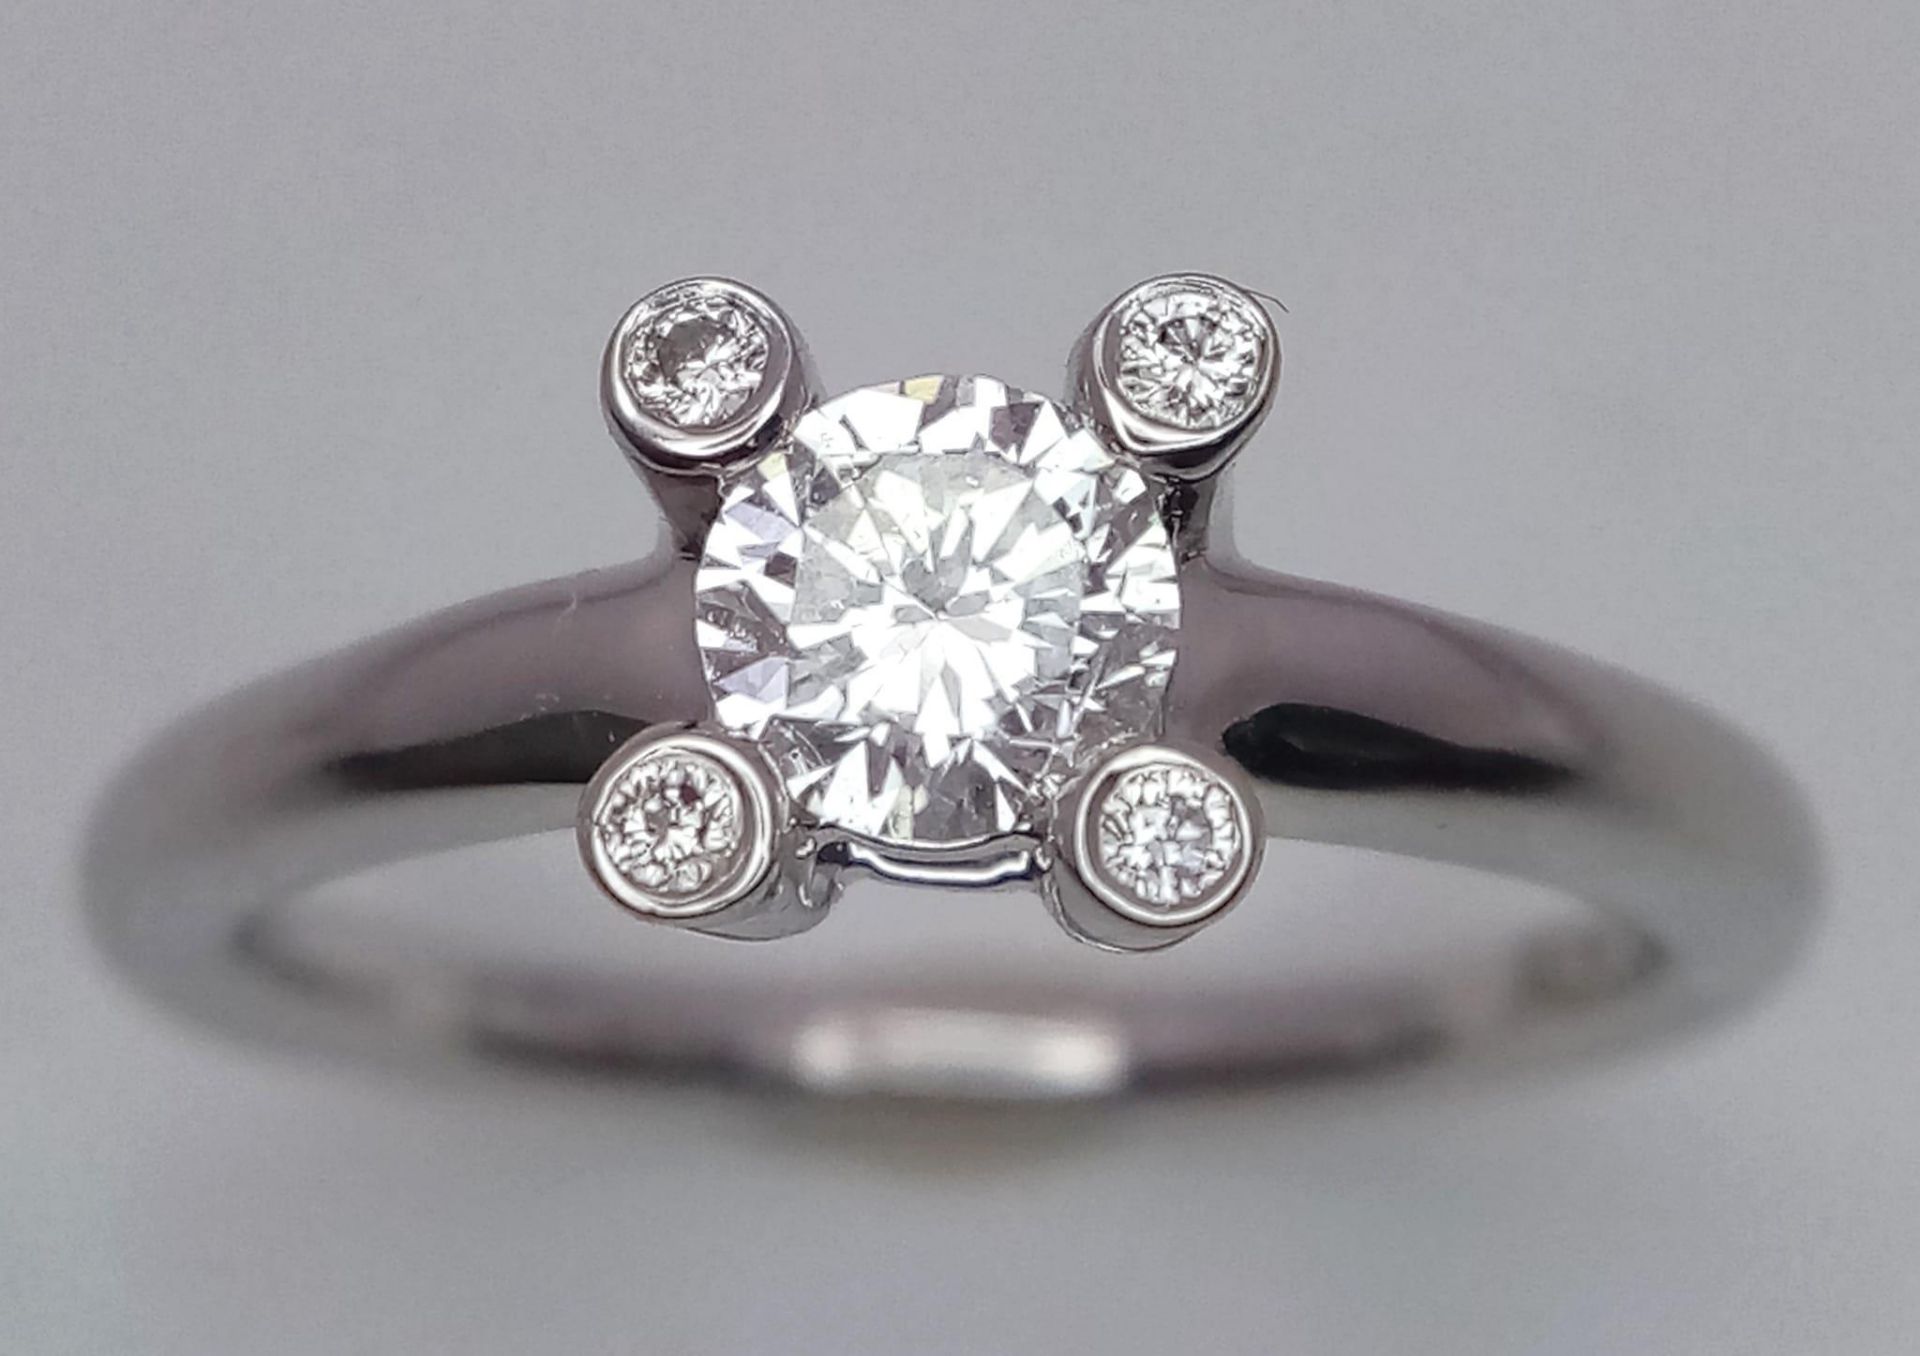 A 18CT WHITE GOLD DIAMOND SOLITAIRE RING 0.50CT 4.7G SIZE M/N ref: P159 - Image 2 of 4